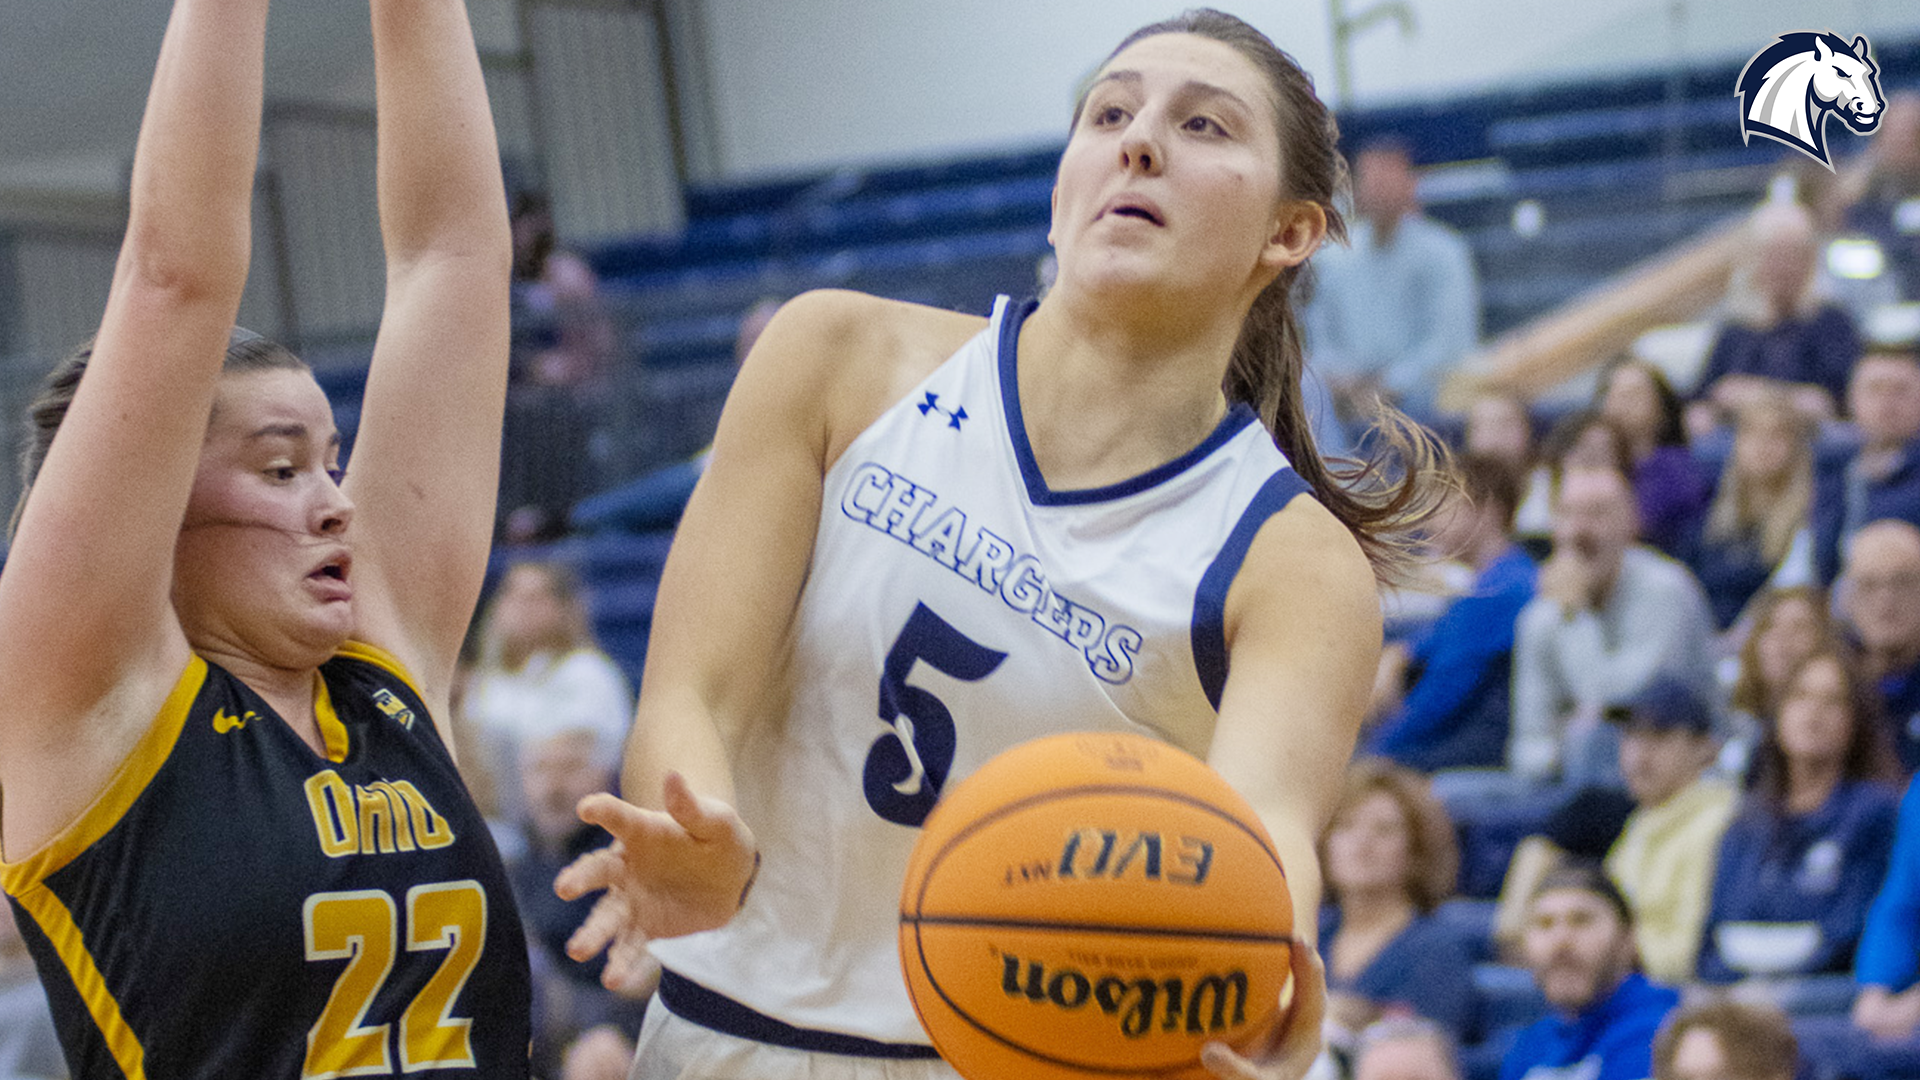 Chargers’ Sydney Mills earns second G-MAC Player of the Week (Feb. 6-13) honor